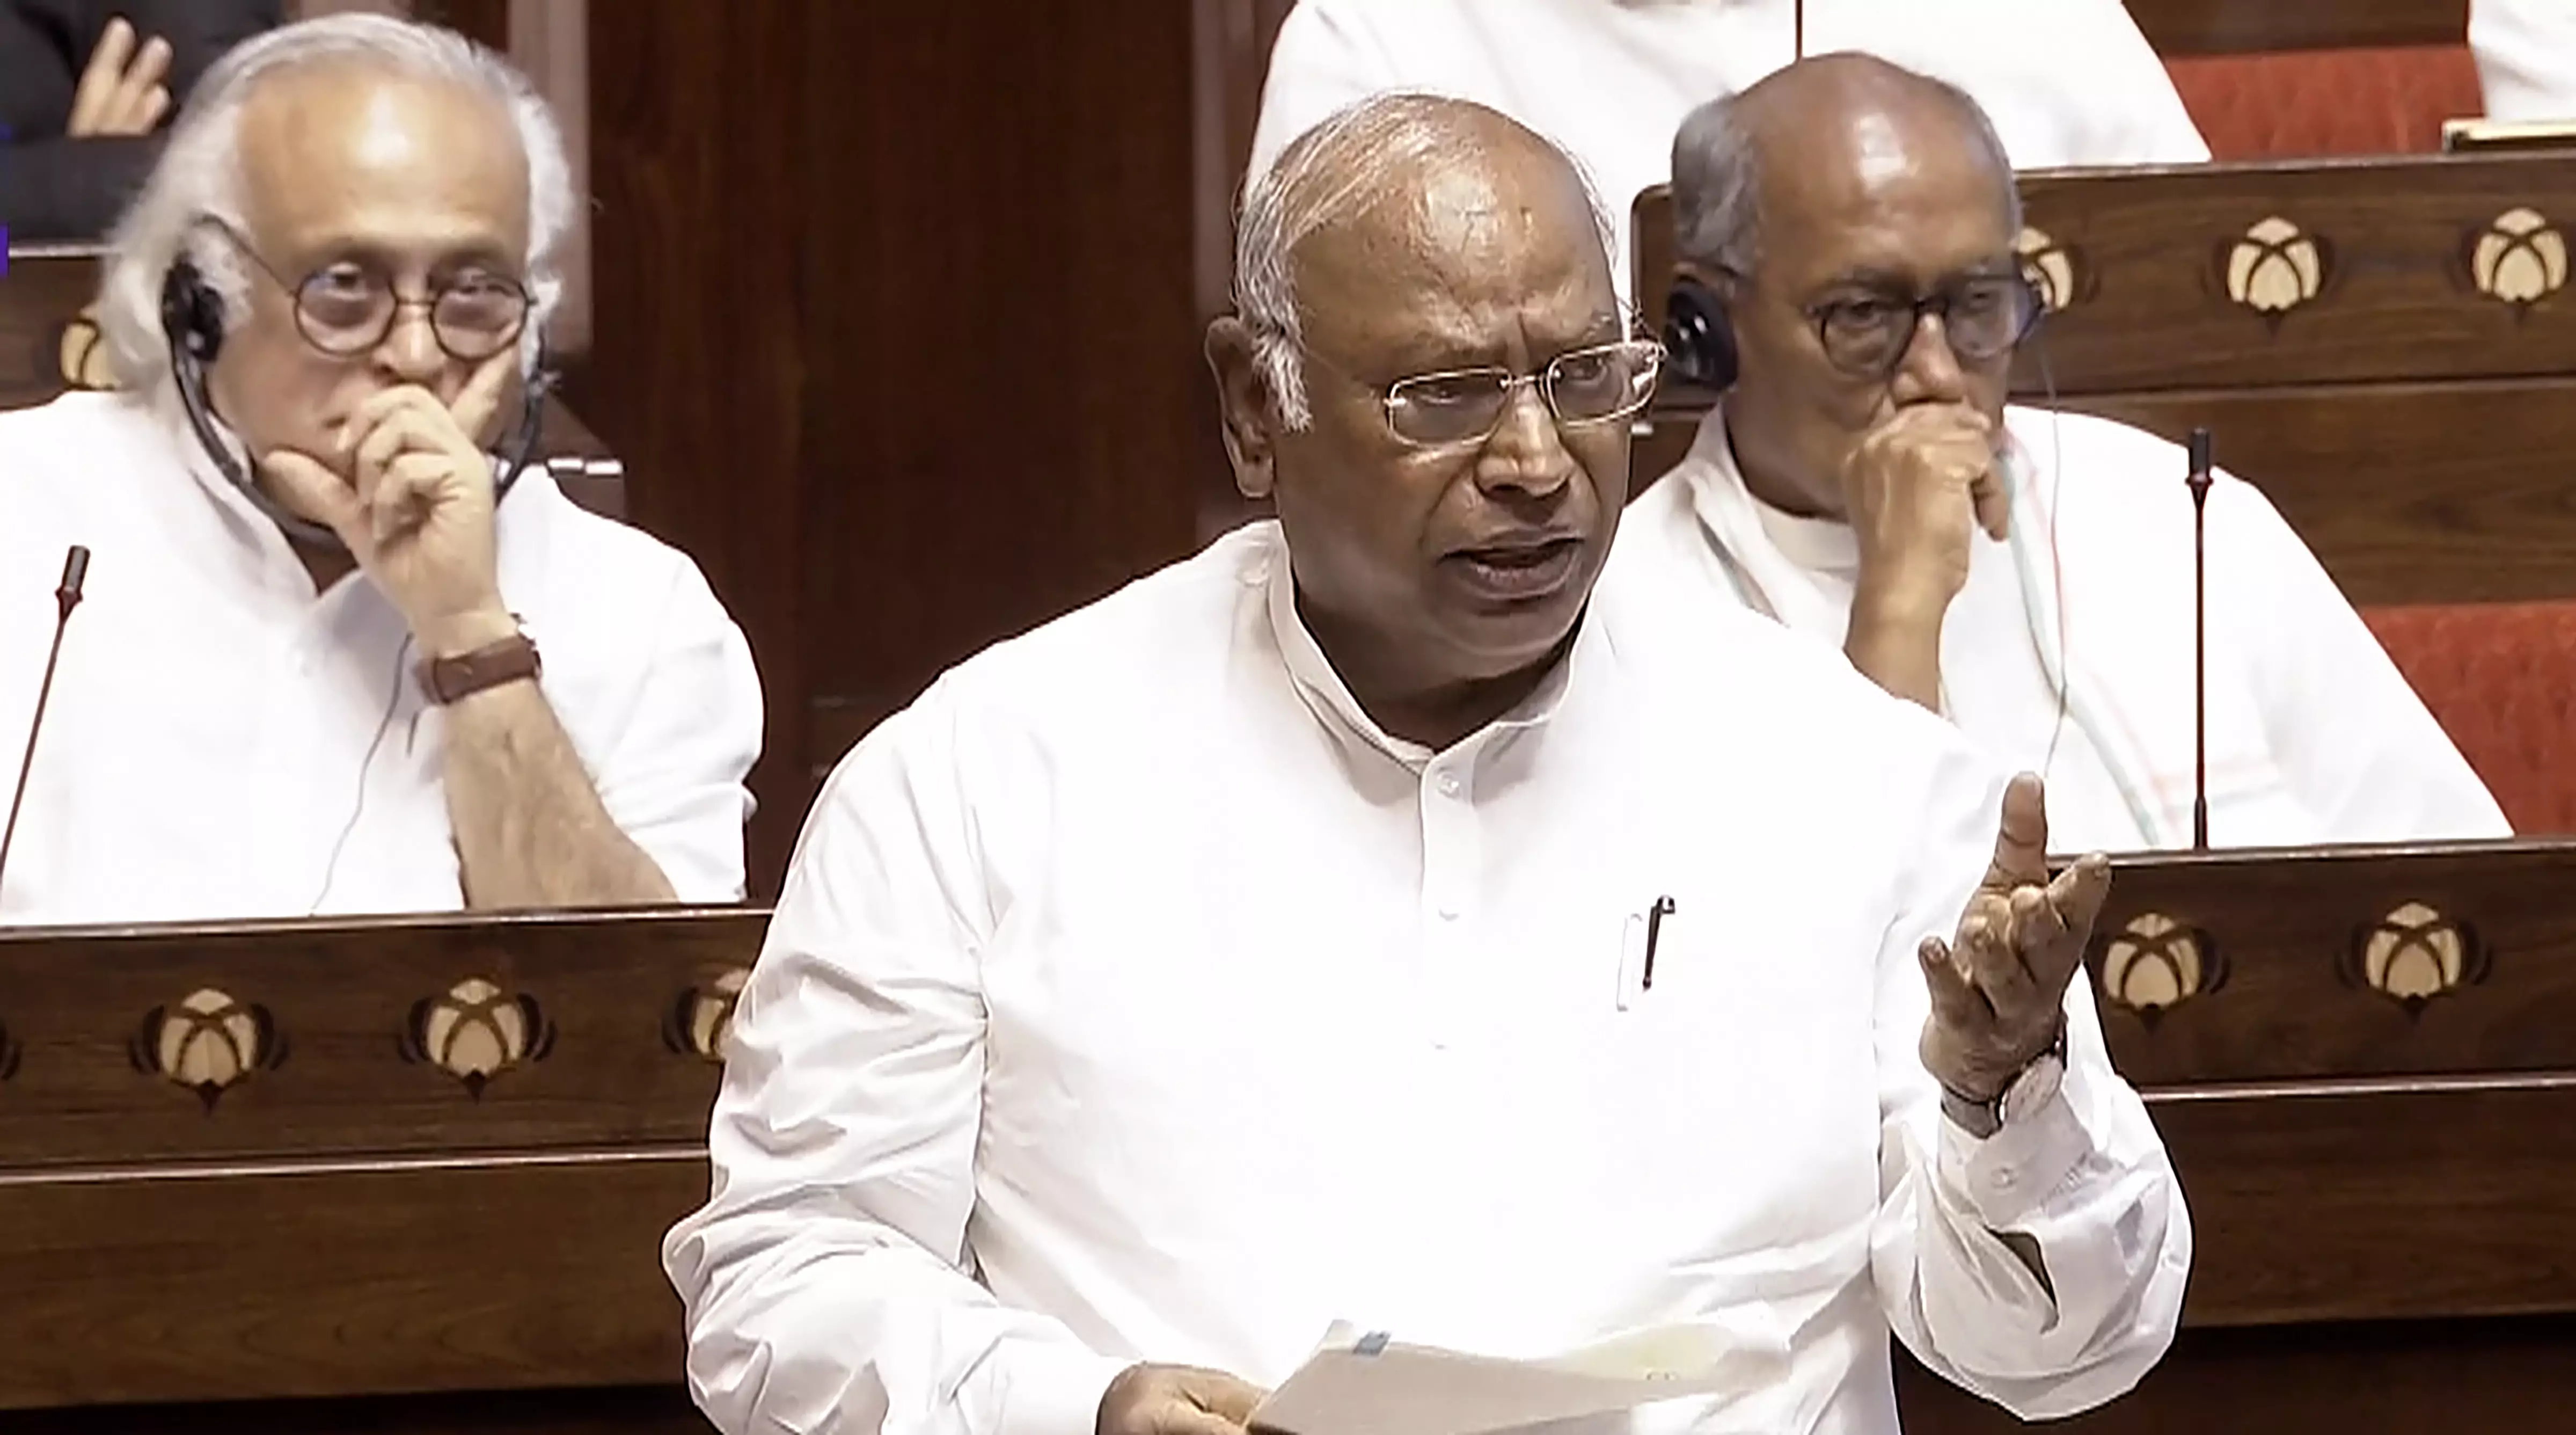 Days after near showdown, Dhankhar and Kharge share light moments